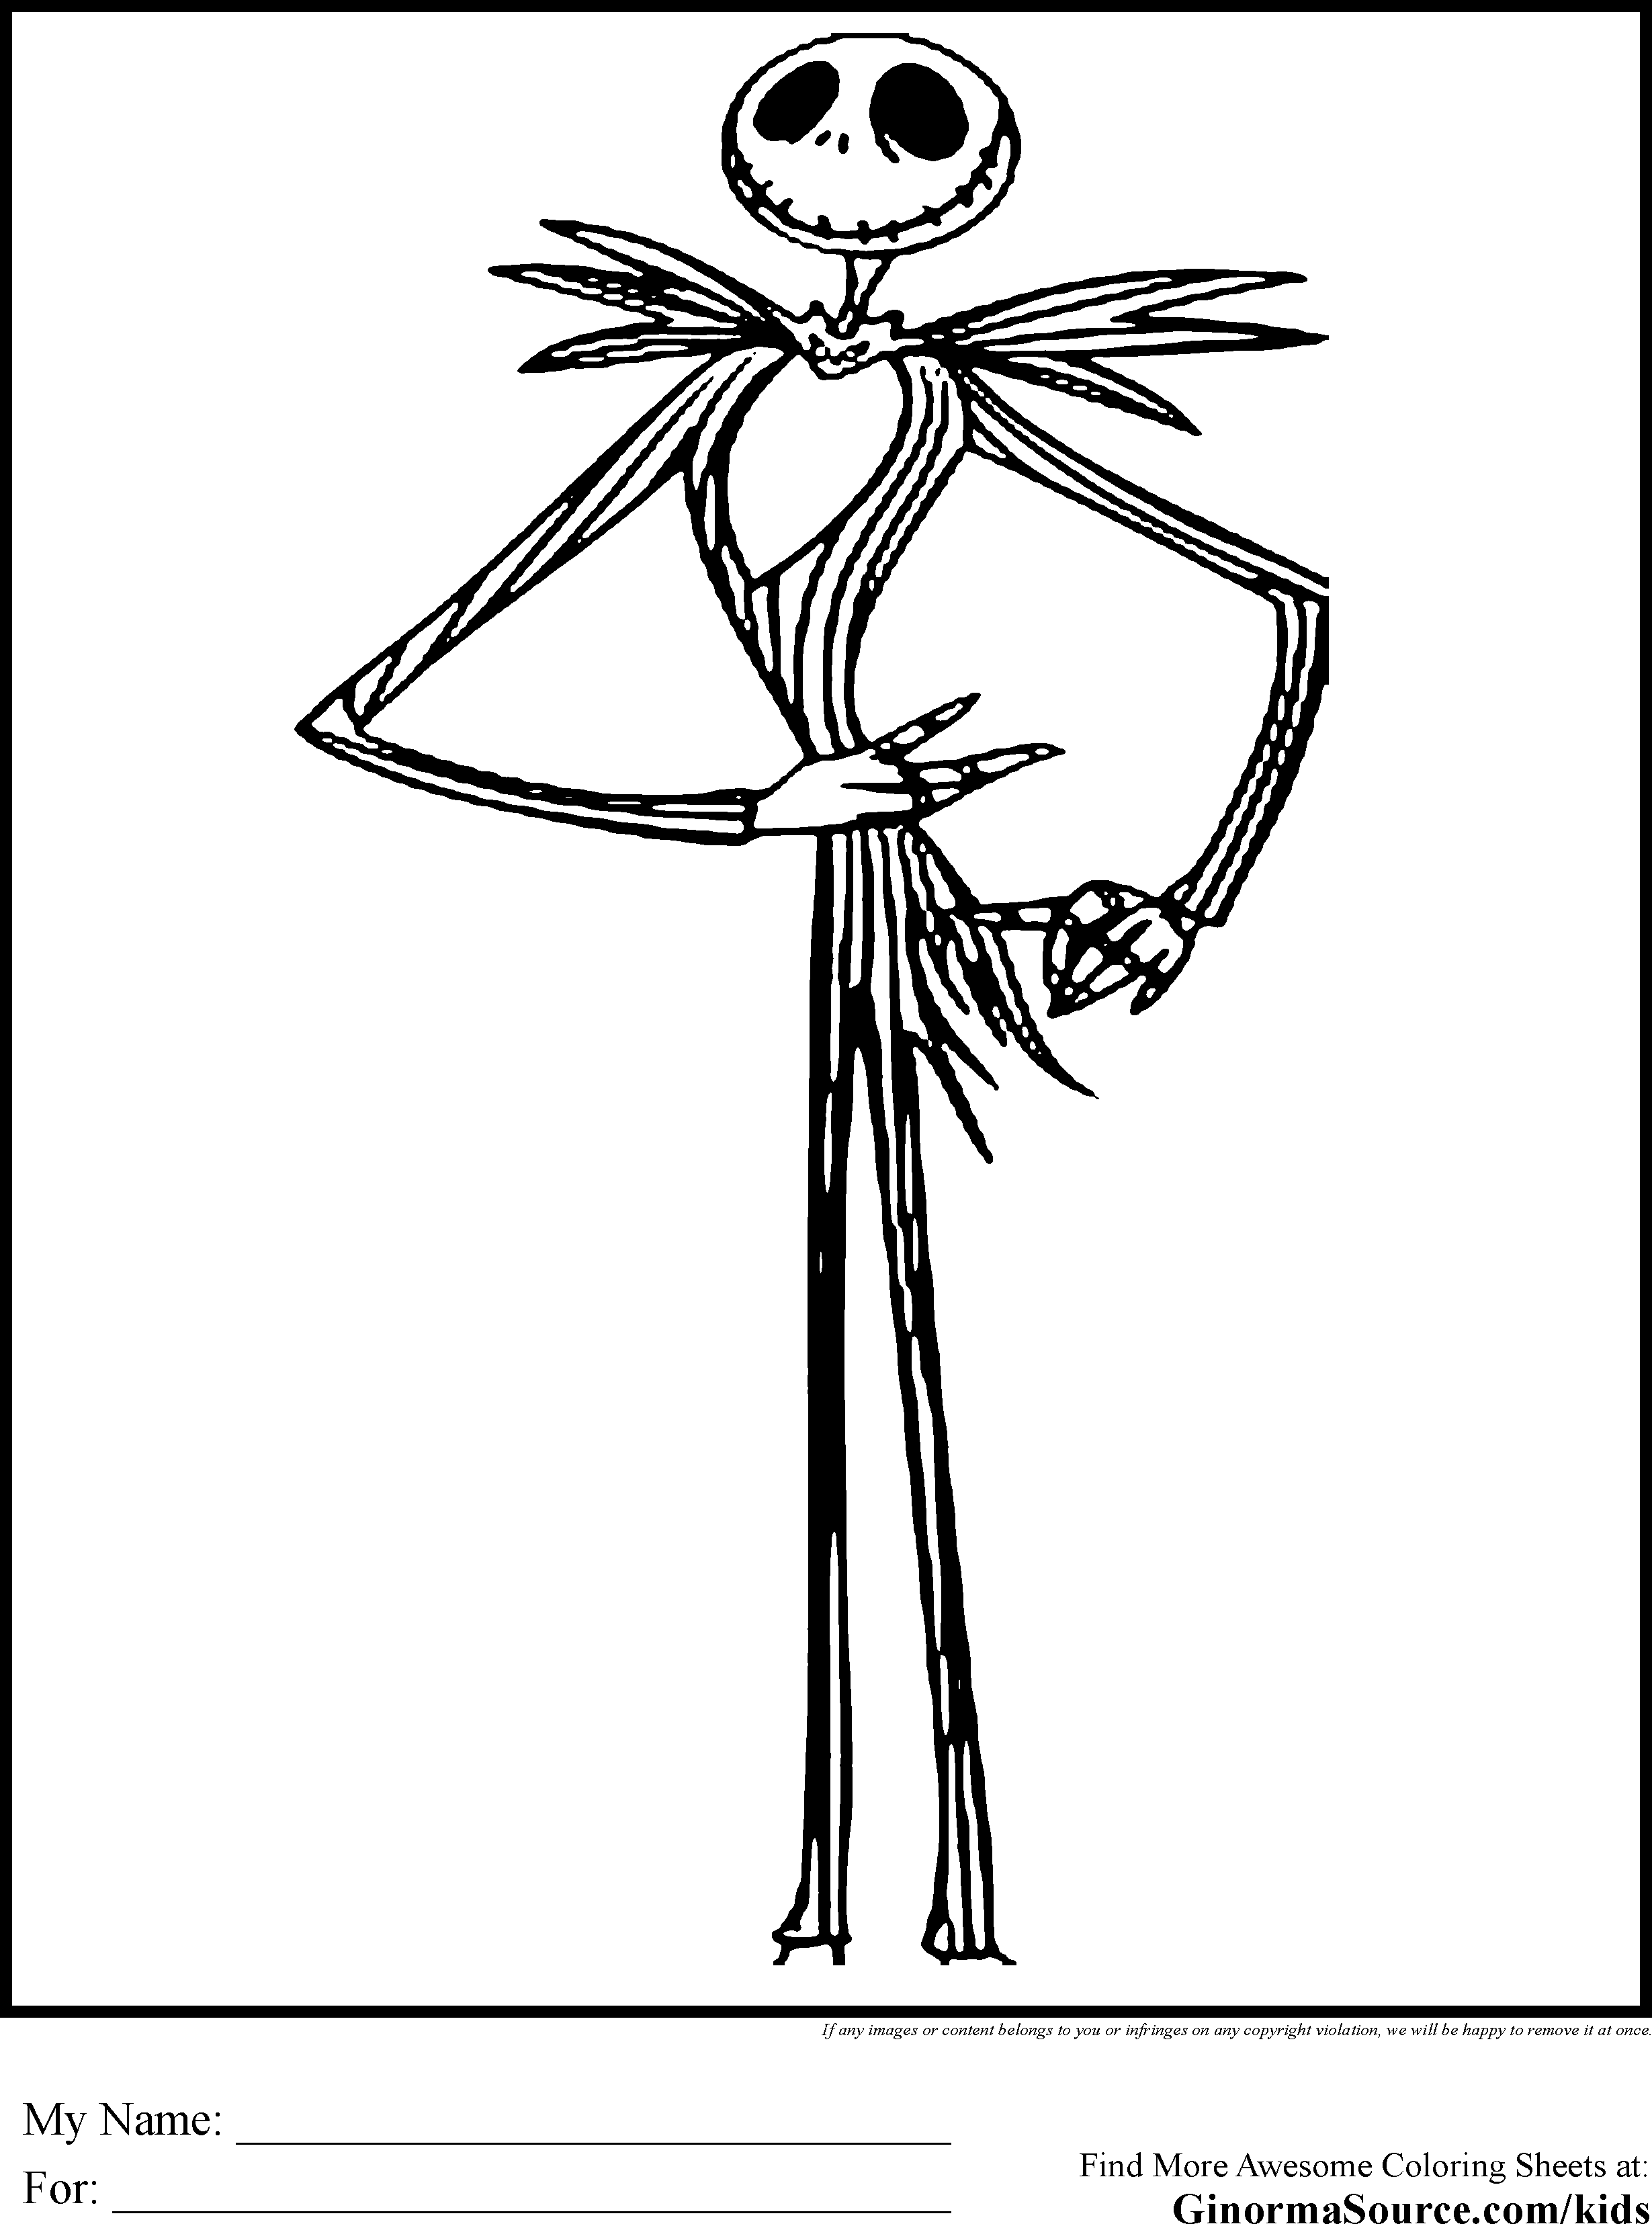 nightmare before christmas coloring pages | Only Coloring Pages